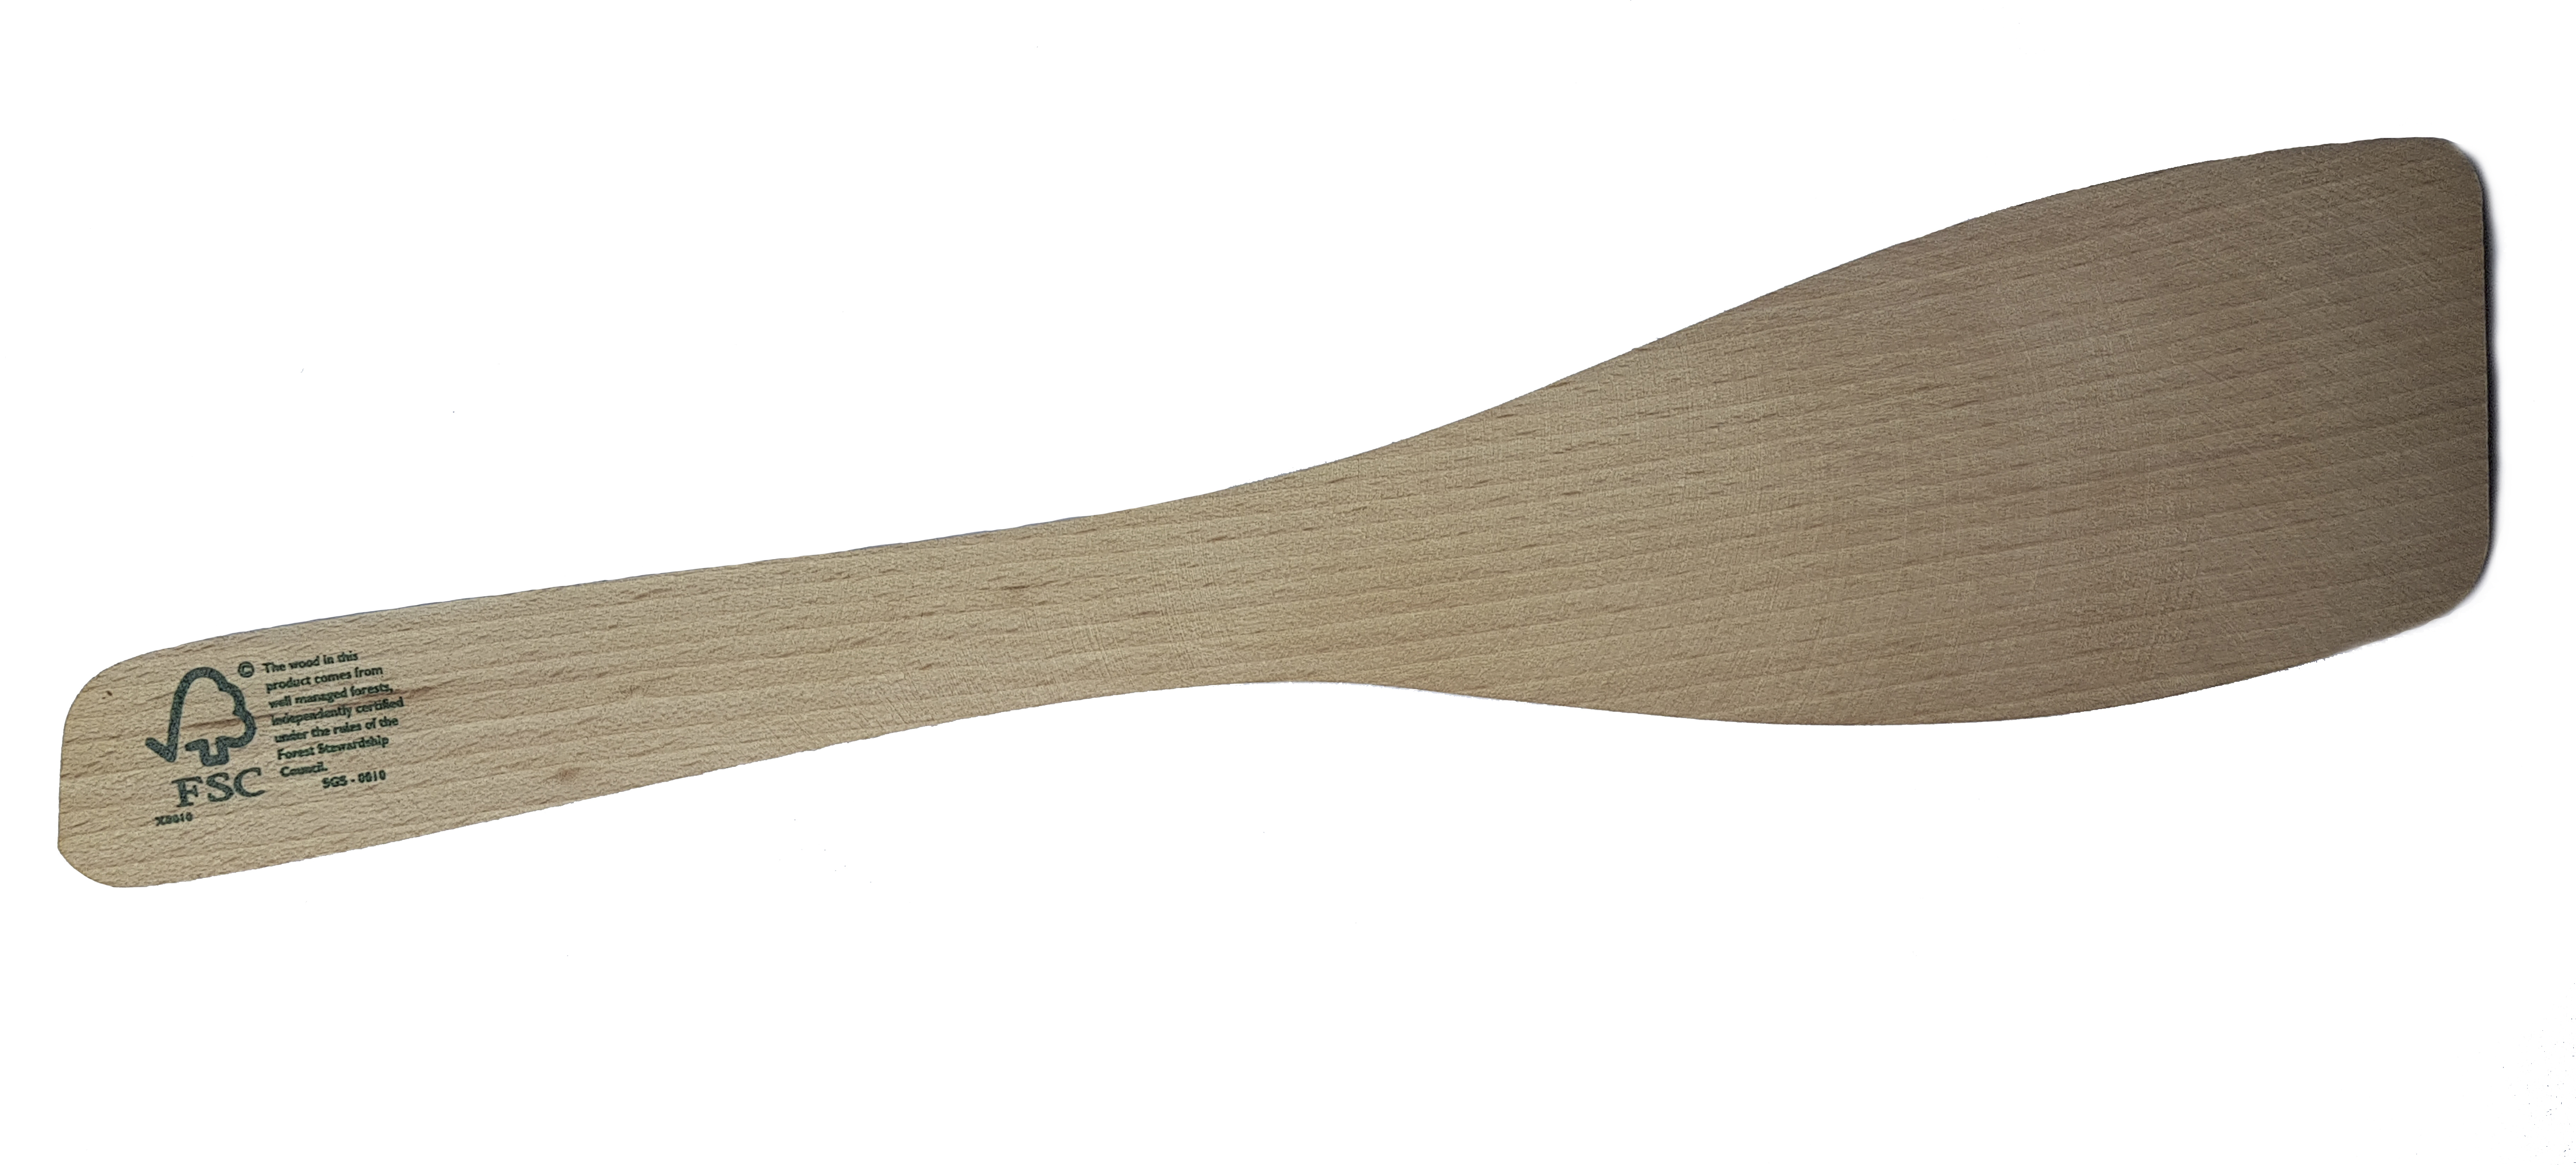 wooden spatula with FSC label